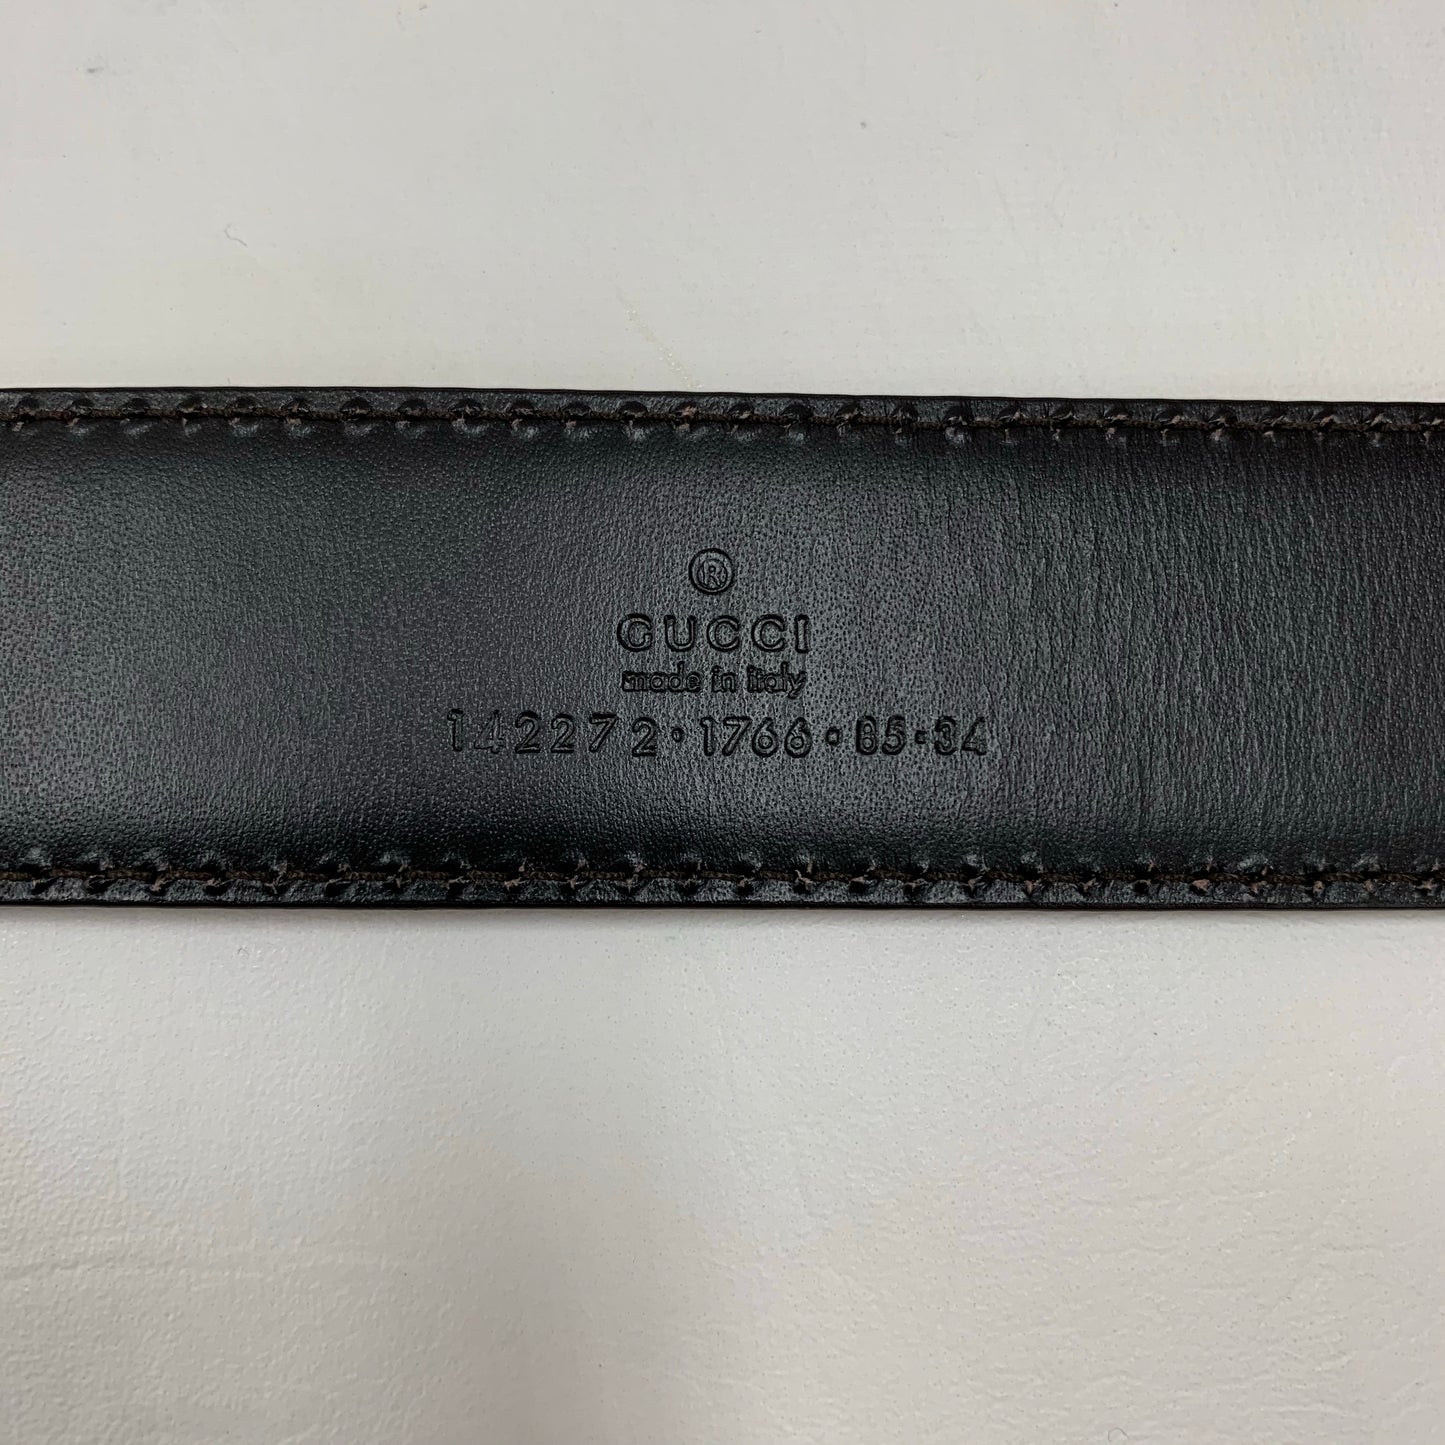 Authentic Gucci Marigold Leather Belt with G Buckle